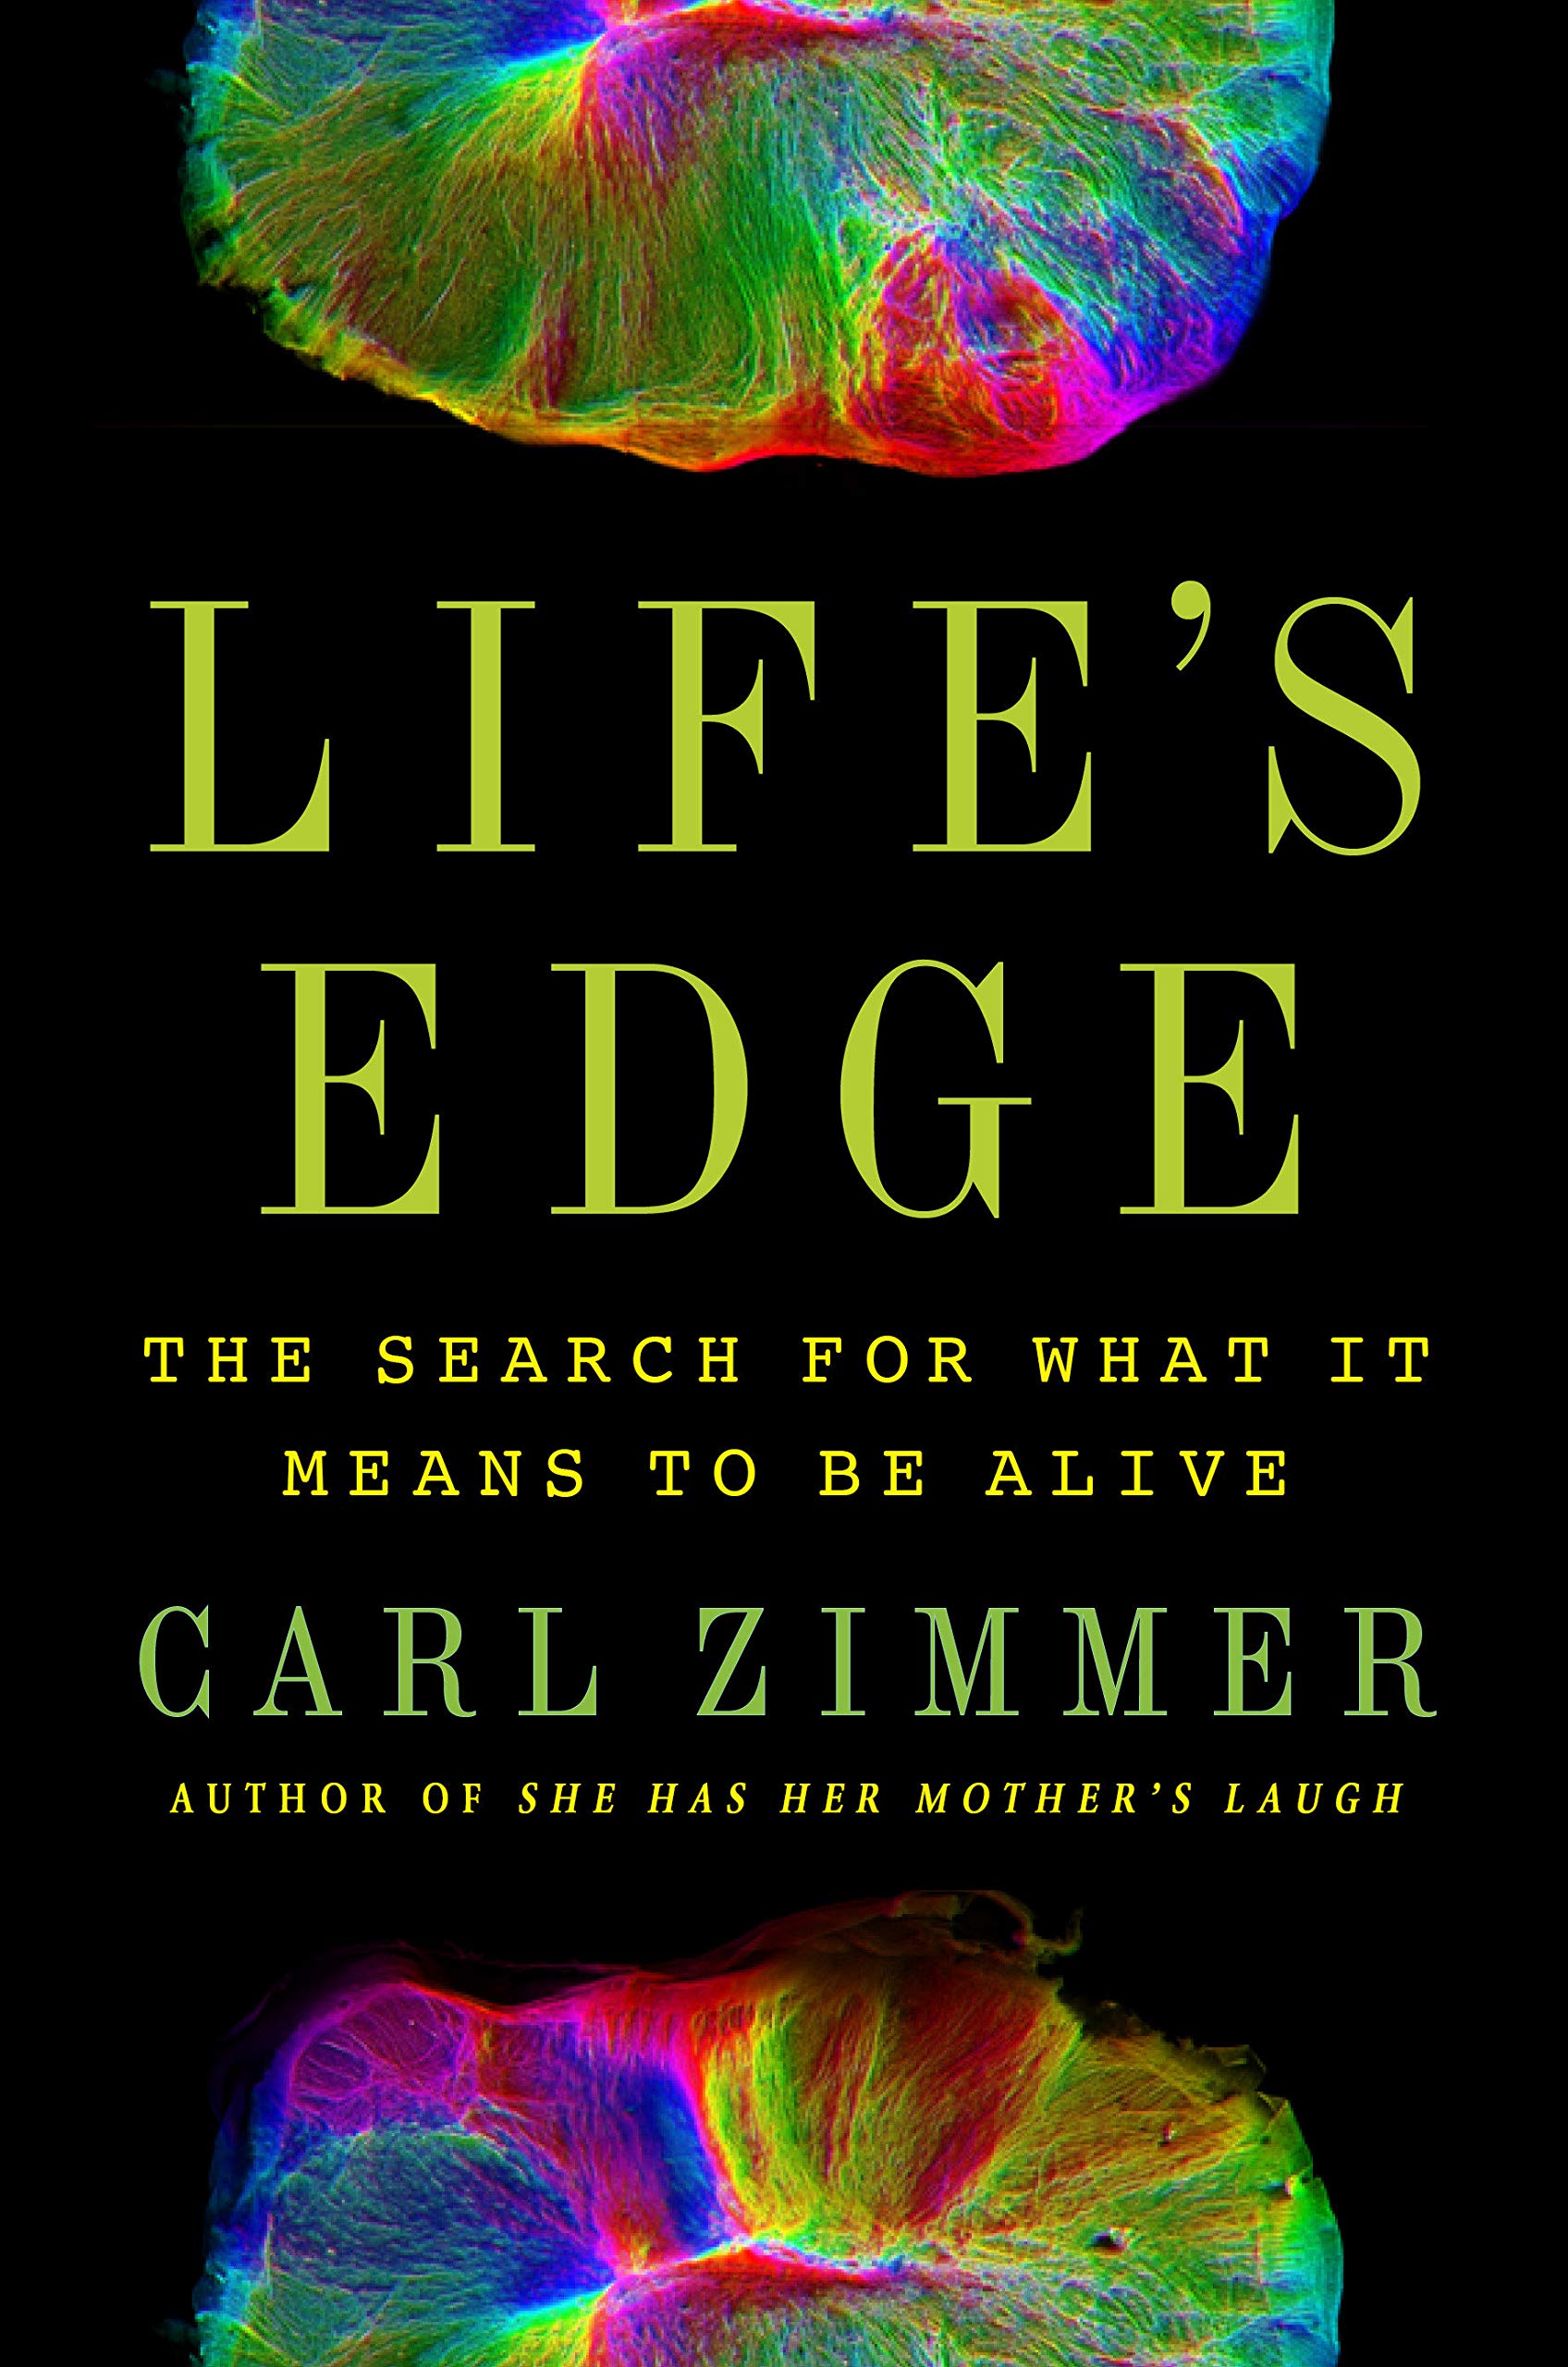 Life's Edge: The Search for What It Means to Be Alive, via Carl Zimmer-Excellent & Brilliant Science Books